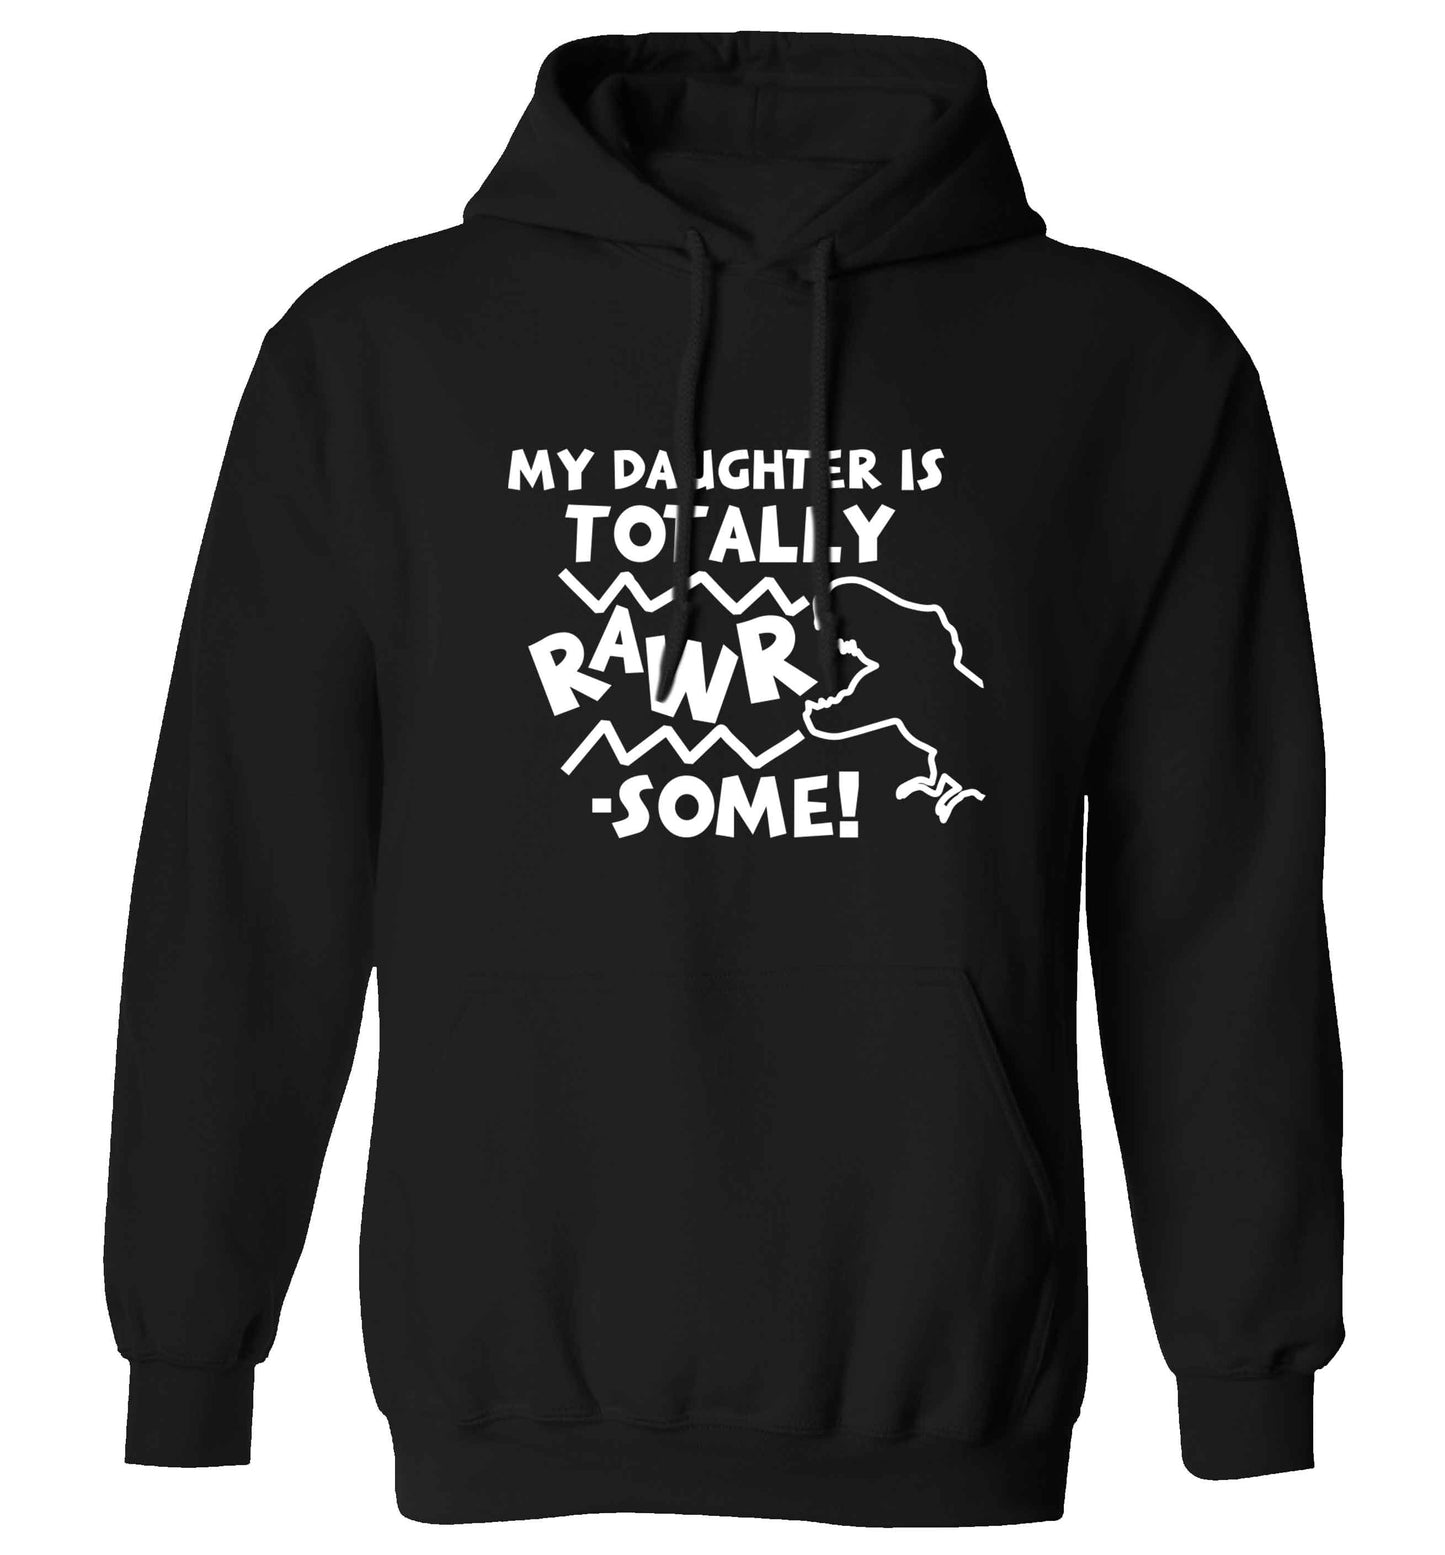 My daughter is totally rawrsome adults unisex black hoodie 2XL